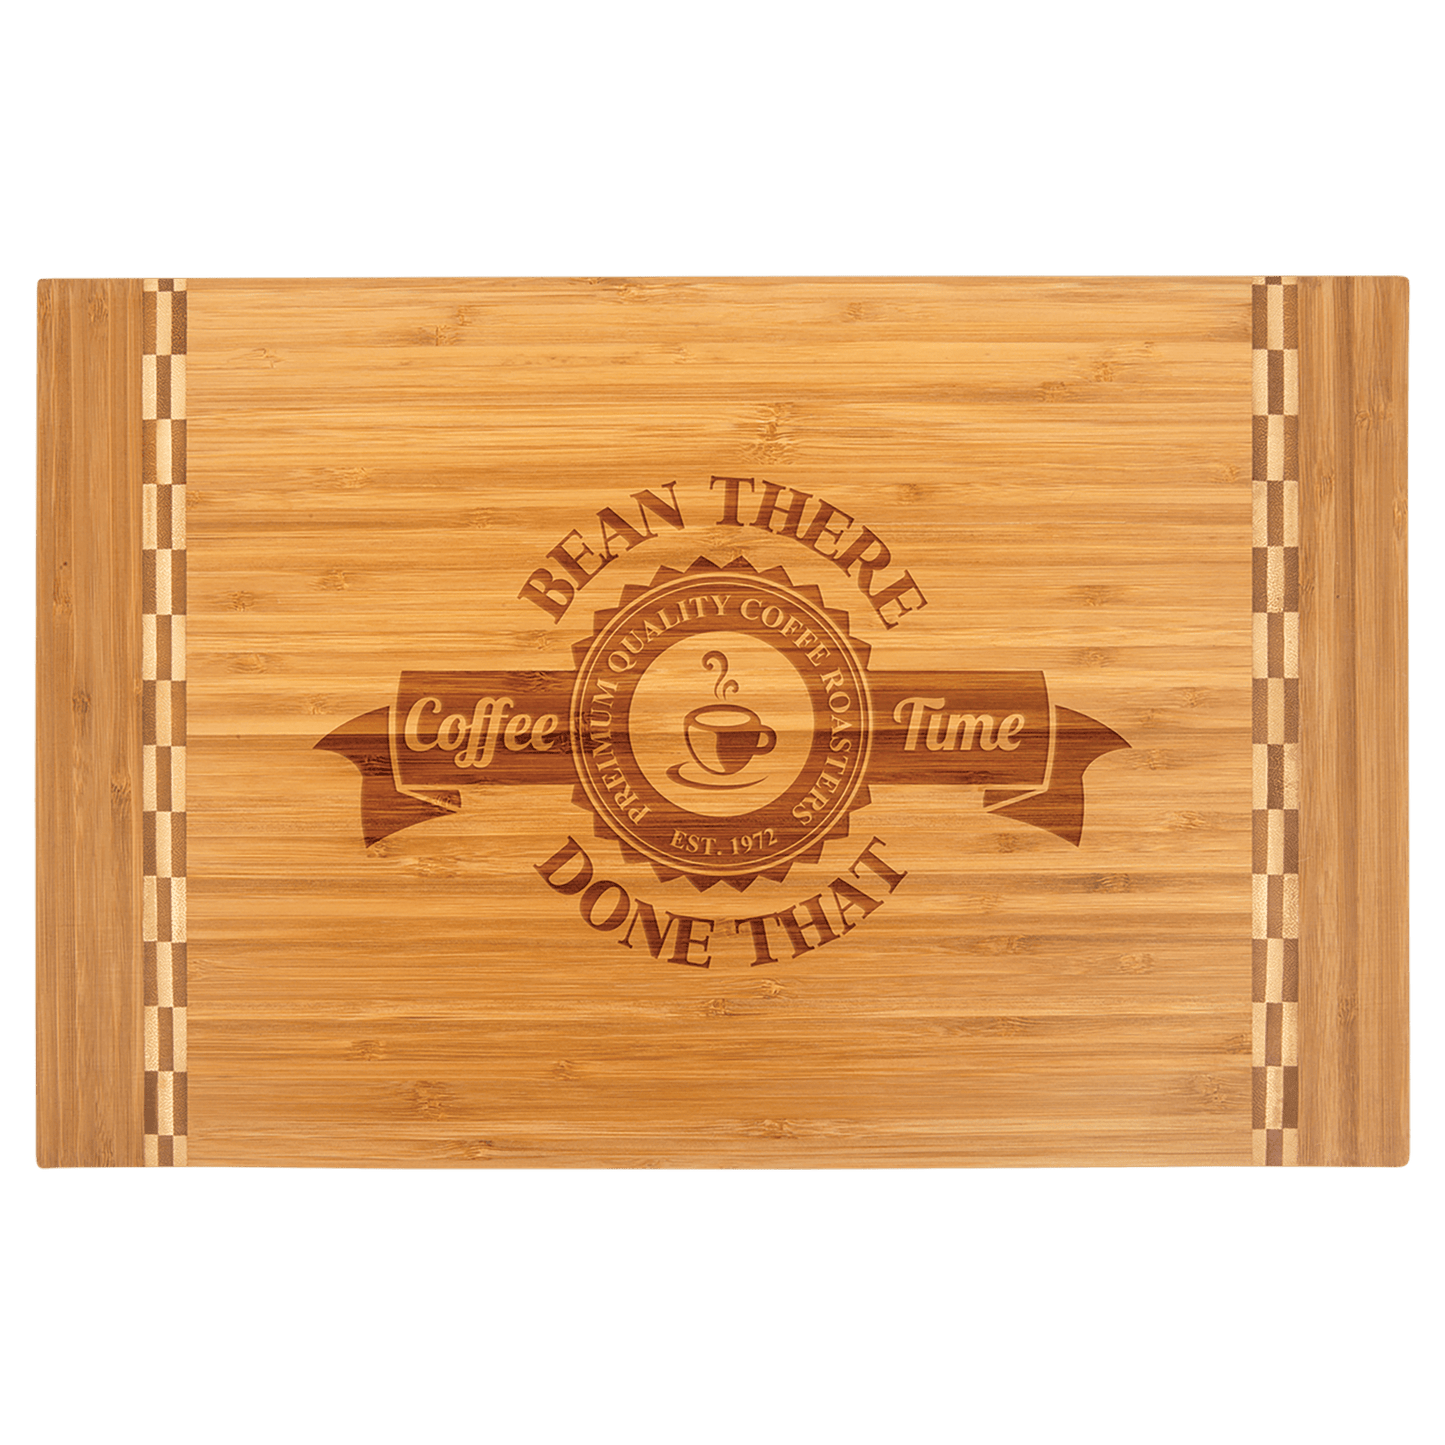 MGFT472 - Large Custom Charcuterie Board with Butcher Block Inlay